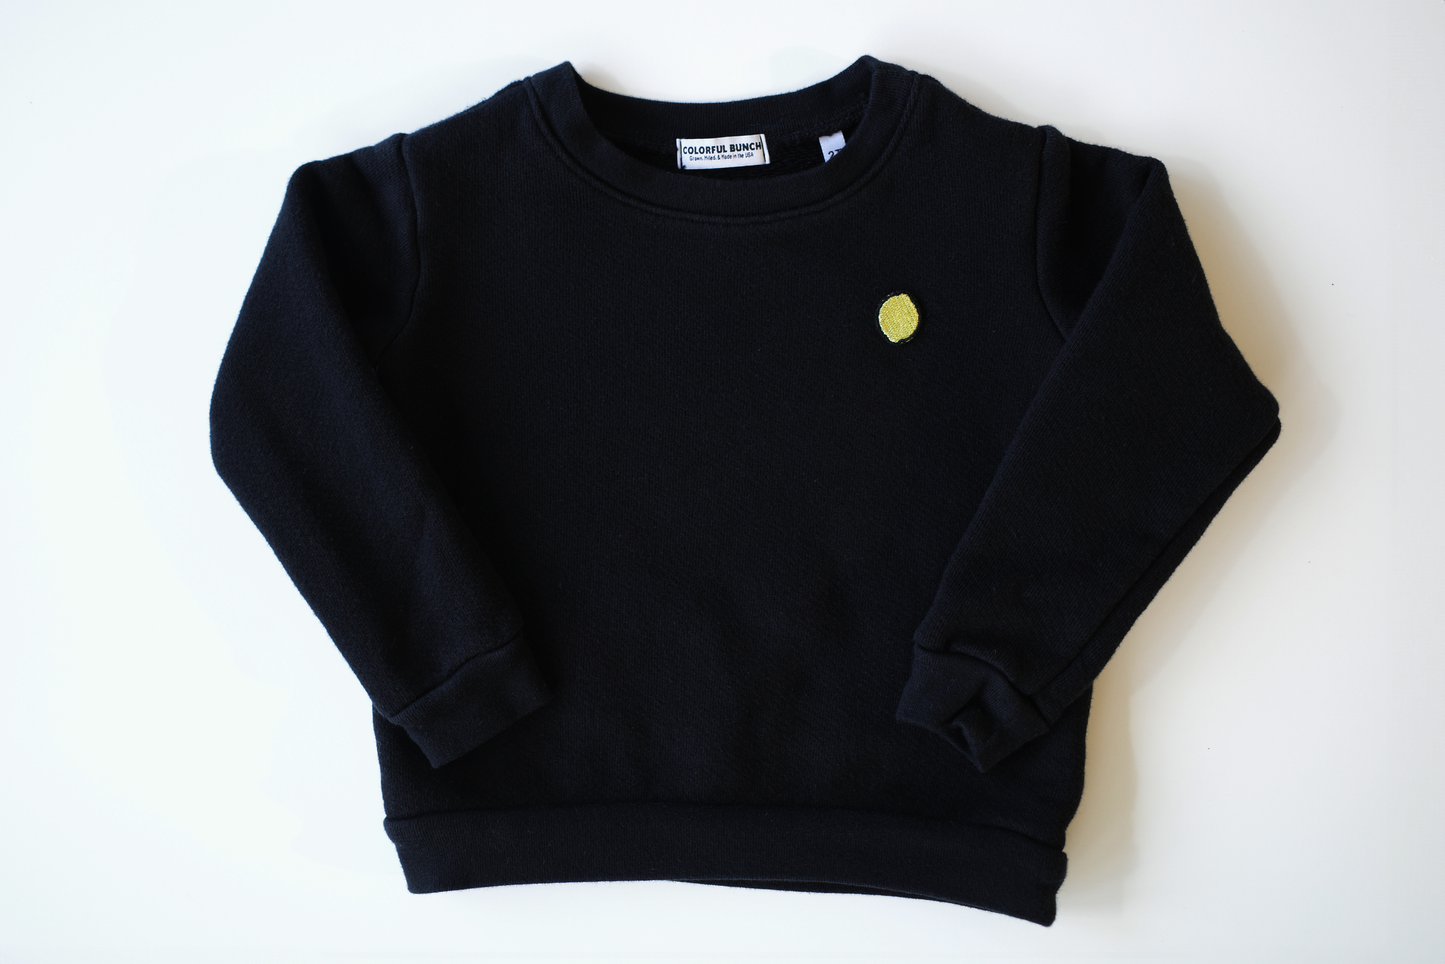 Vintage-inspired, garment-dyed black organic cotton children's sweatshirt with a vibrant lemon embroidery for a pop of color, made in the USA, part of Colorful Bunch's luxurious eco-friendly kids' clothing line.